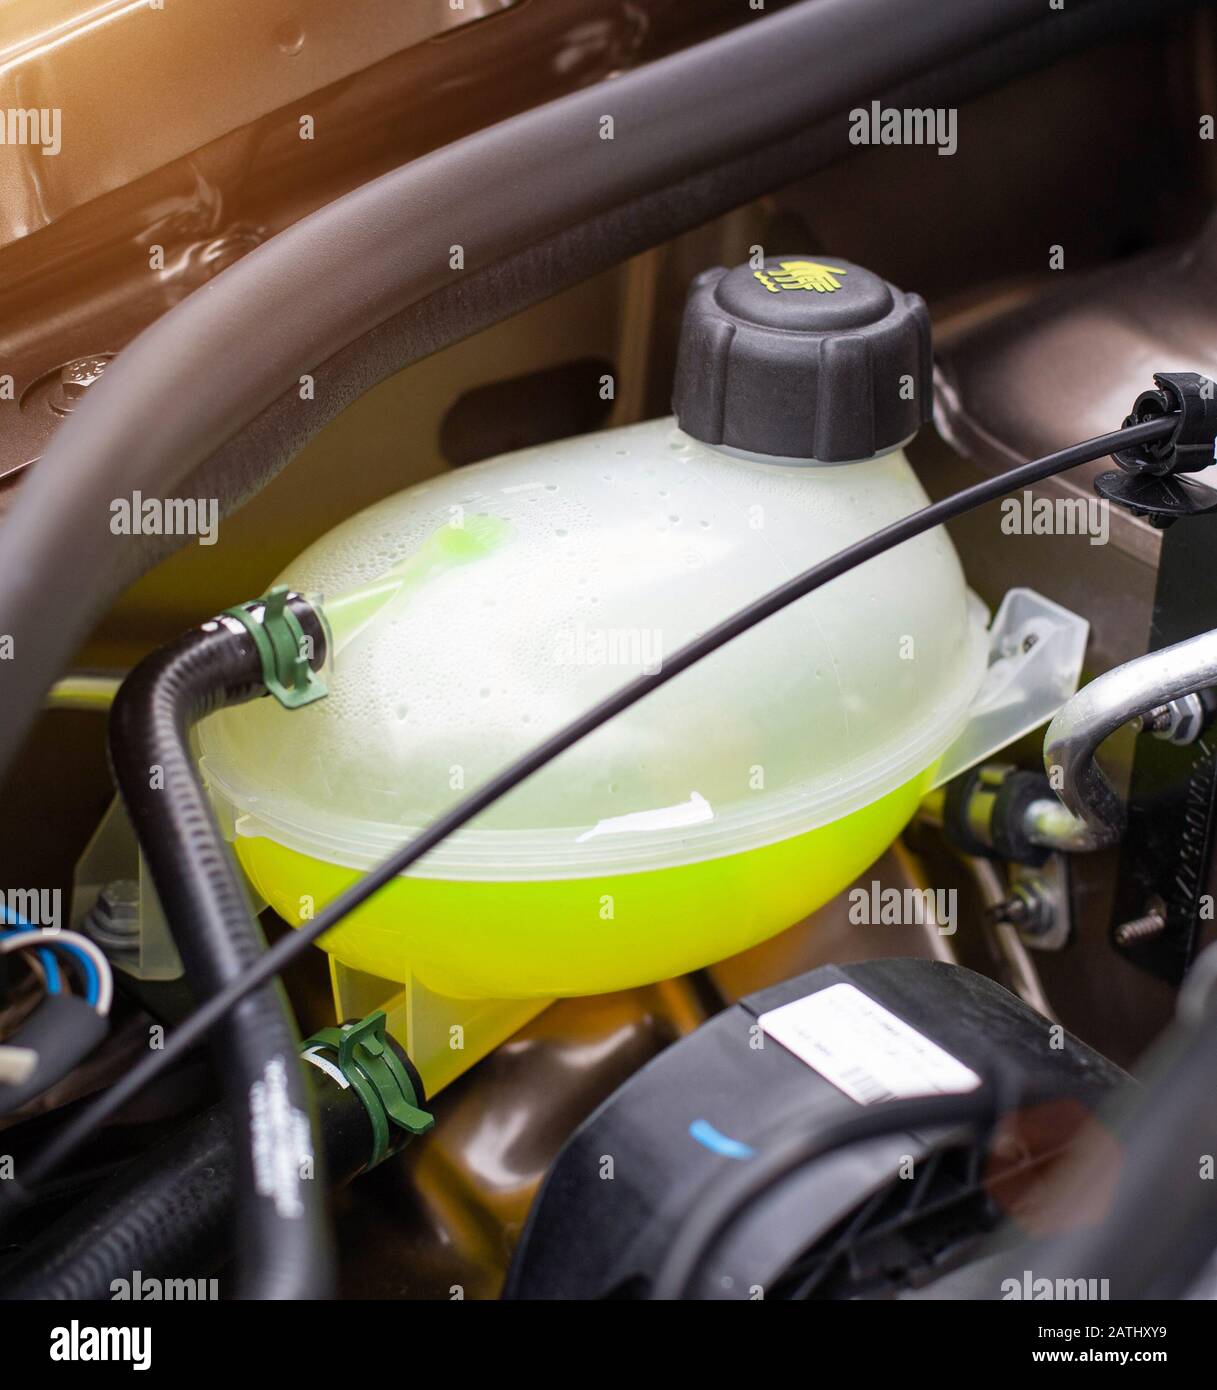 Car reservoir for filling coolant. Yellow antifreeze in the expansion tank, freezing temperature concept in winter, transportation Stock Photo